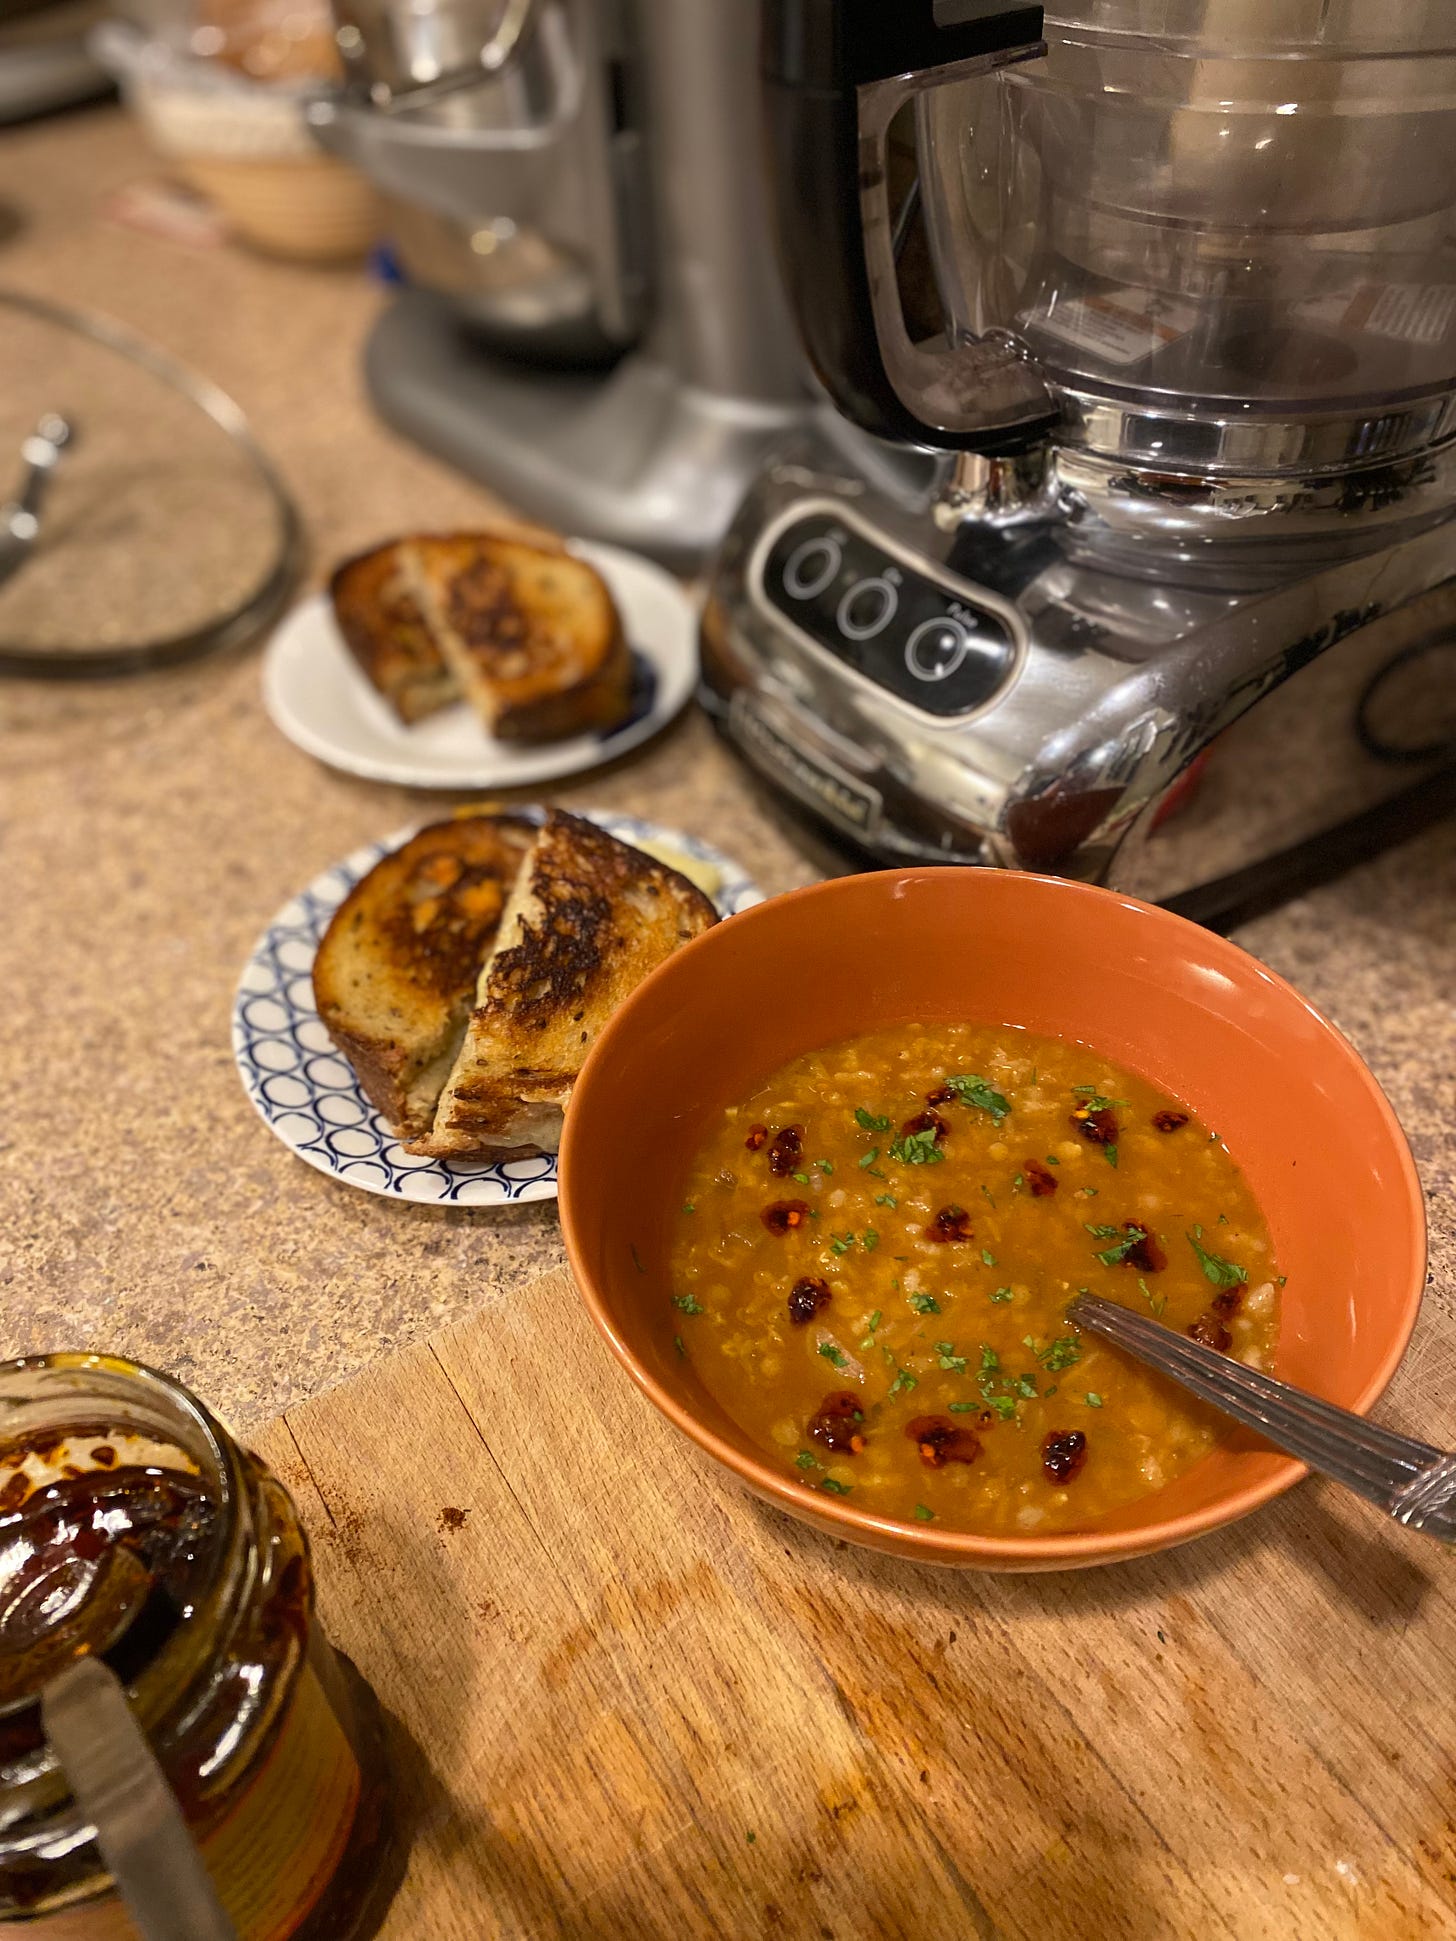 An bright orange bowl of yellow-orange soup dotted with chili crisp and parsley, a spoon sticking out of it. Behind it on the counter are two small plates, each with a grilled cheese sliced in half. In the foreground, the jar of chili crisp is visible with a small spoon in it.